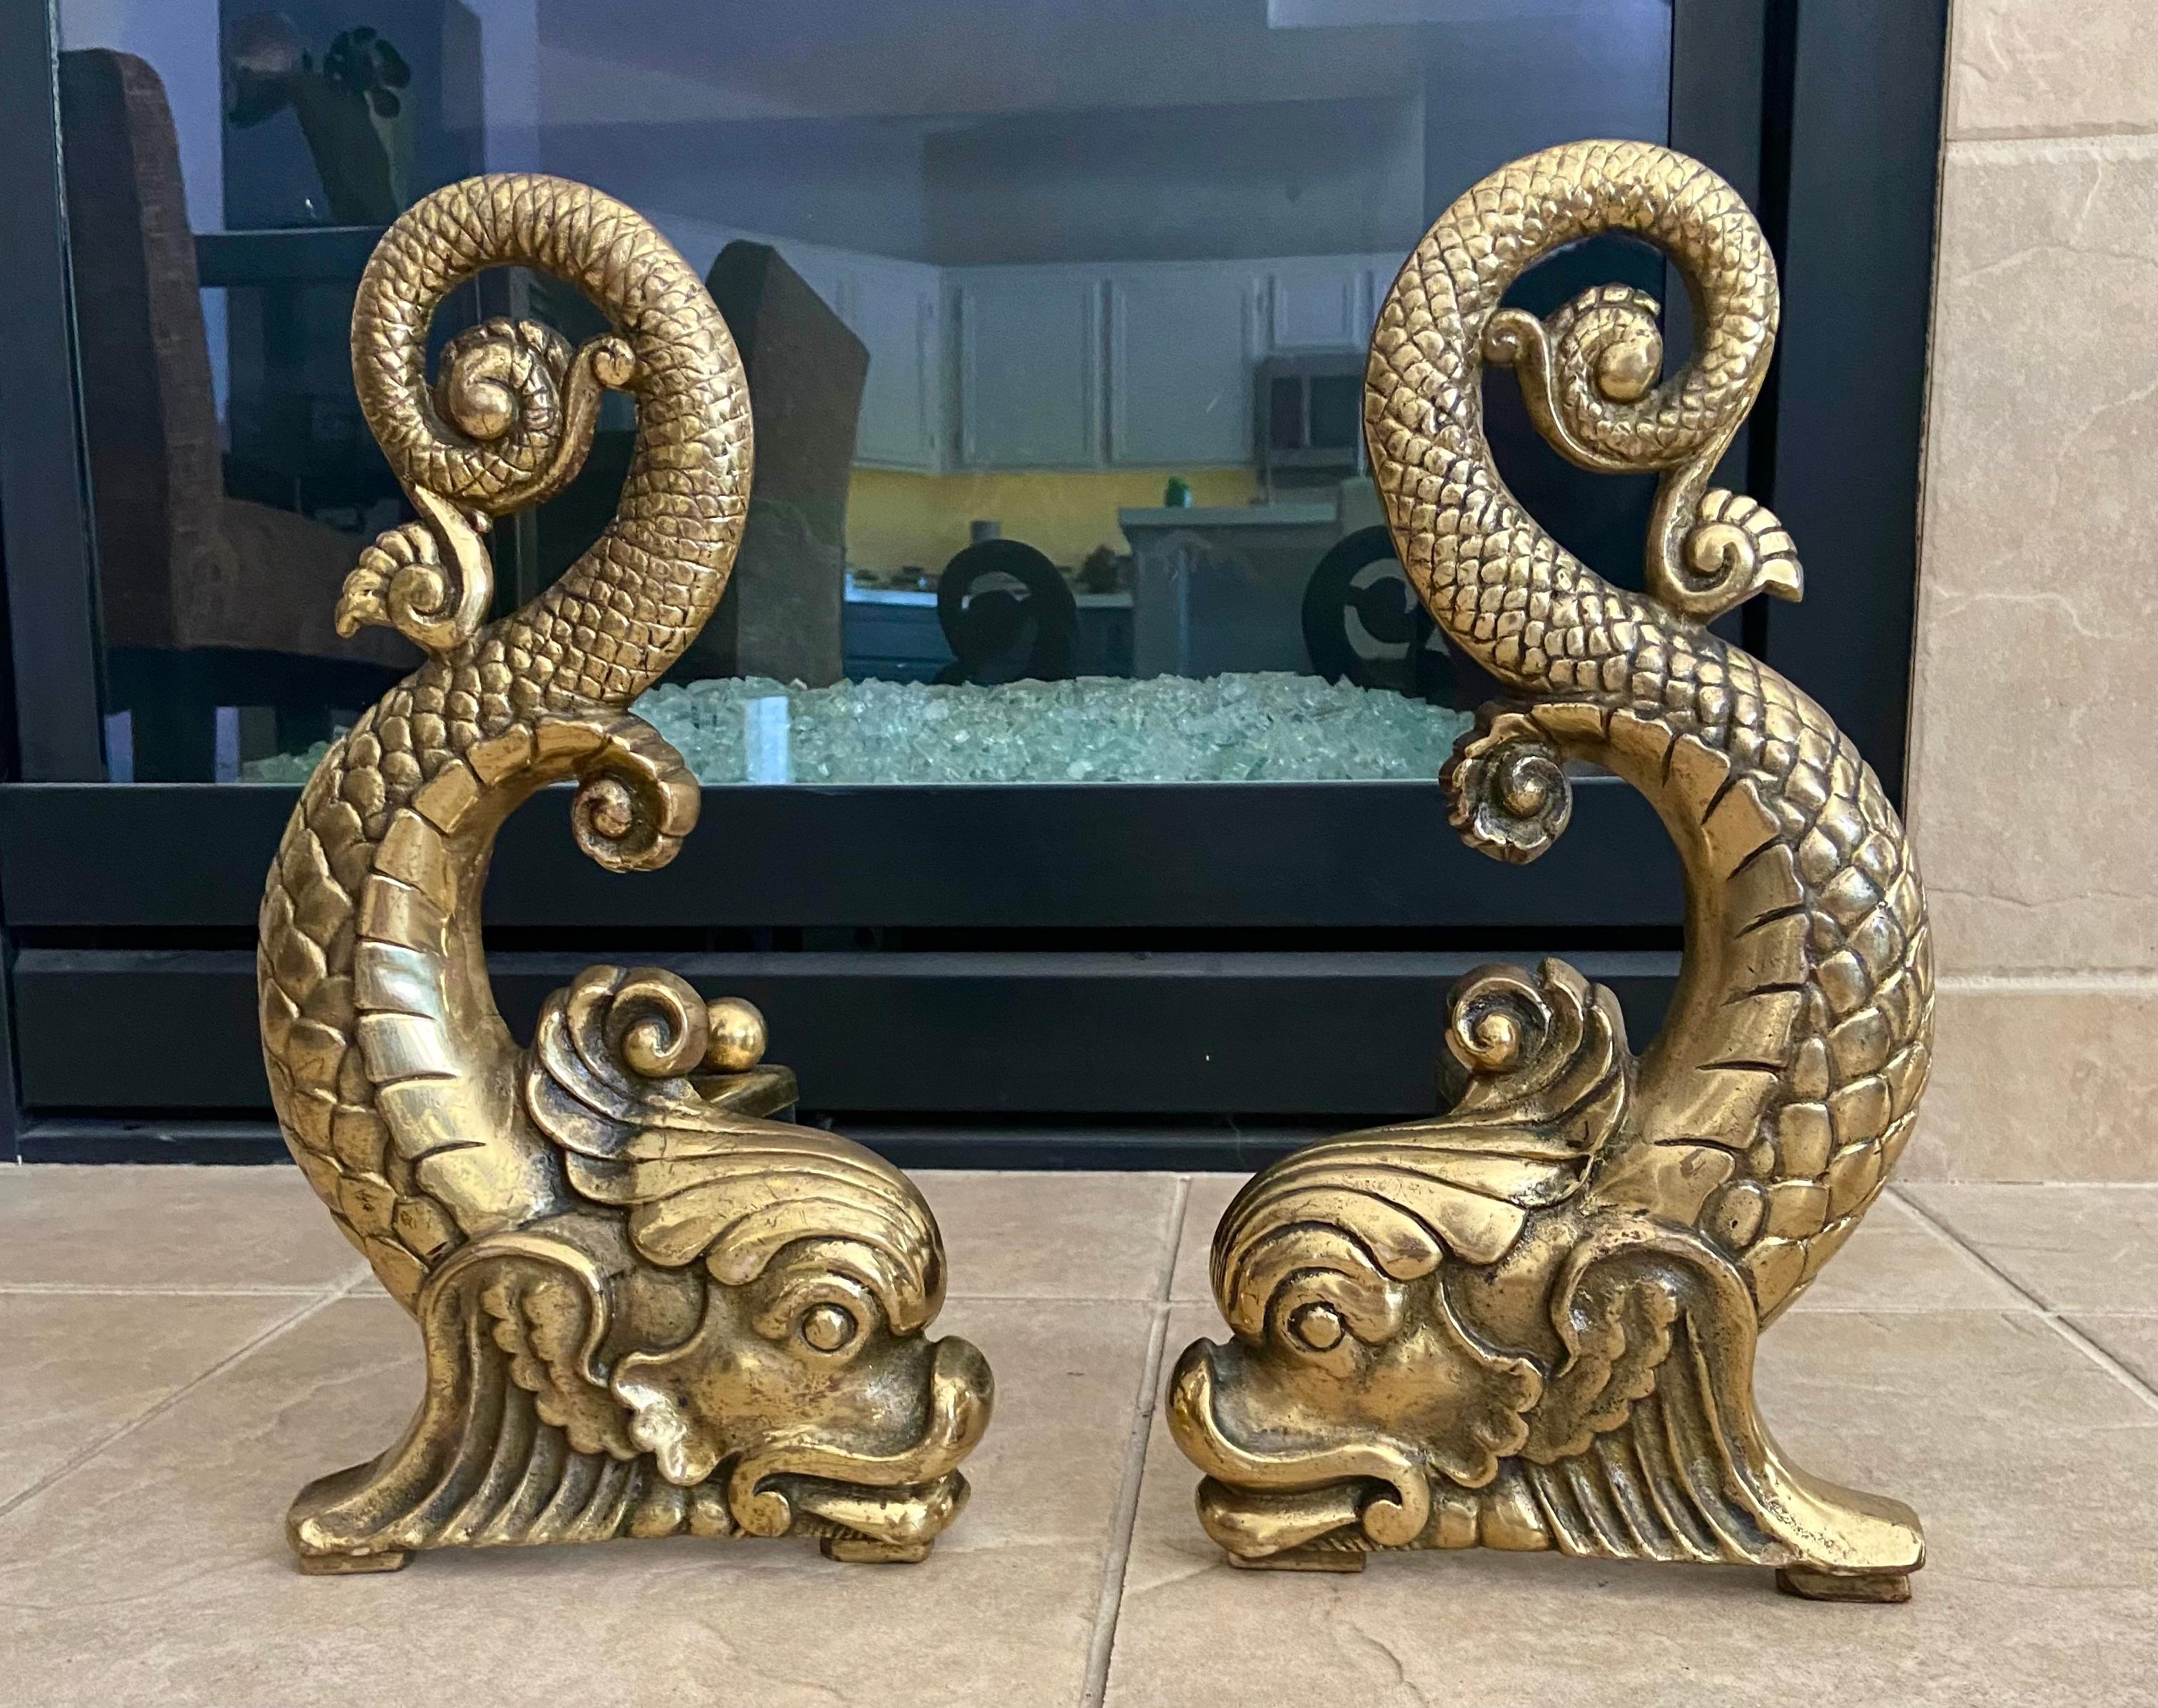 Pair solid brass Dolphin (fish) fireplace neoclassic style andirons or chenets with iron/brass legs. Expertly crafted with fine detailing throughout. European origin most likely France.